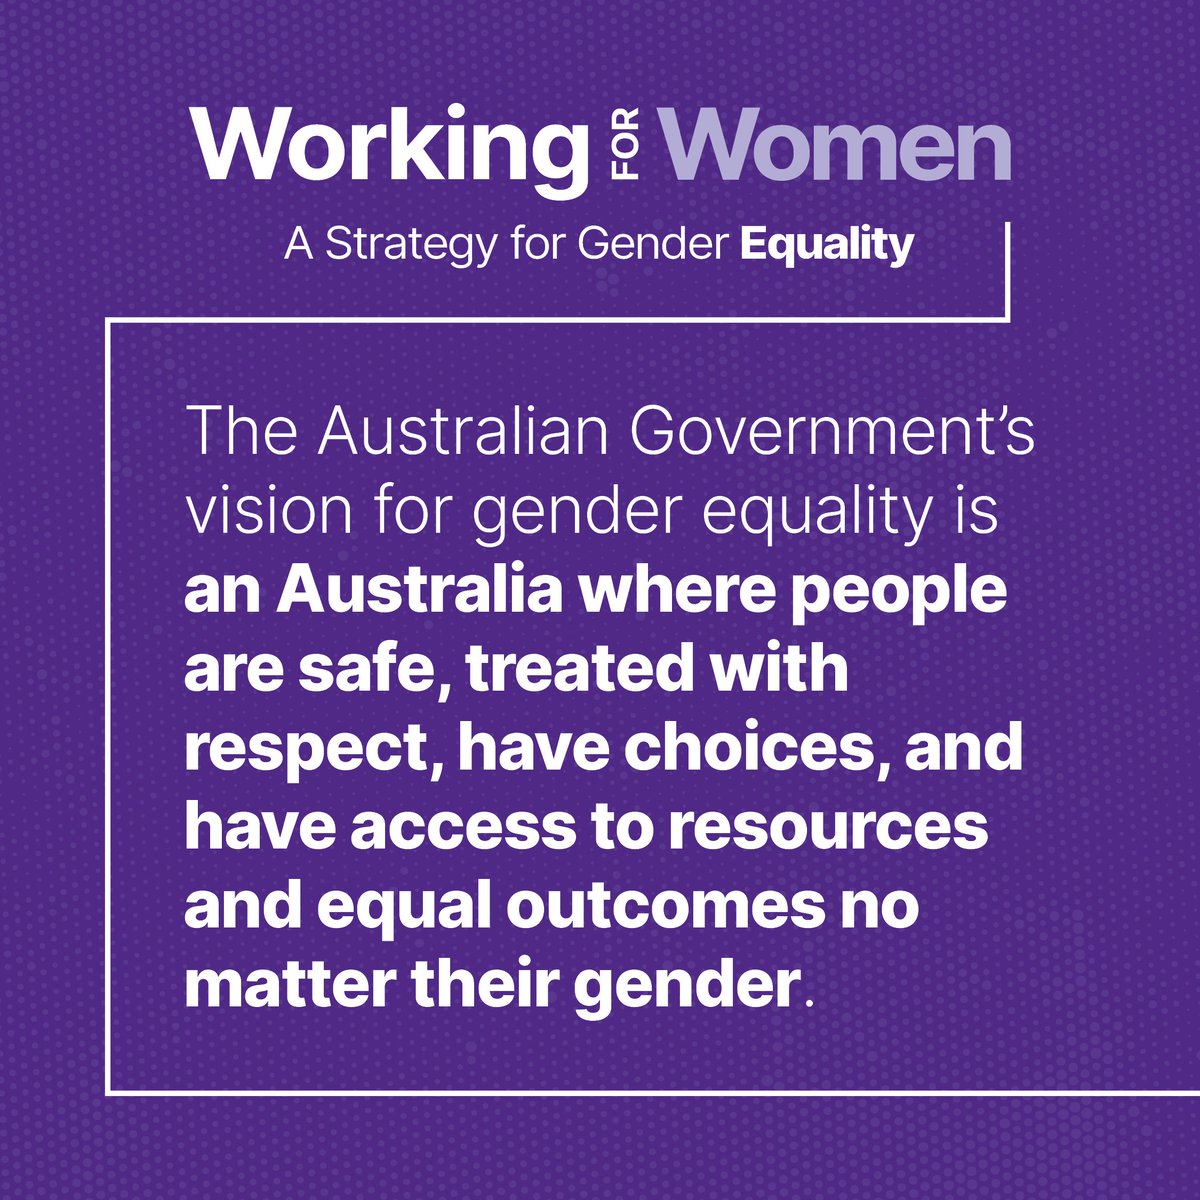 The Australian Government's Working for Women: A Strategy for Gender Equality envisions an Australia where people are safe, treated with respect, have choices and have access to resources and equal outcomes no matter their gender. Find out more at: genderequality.gov.au